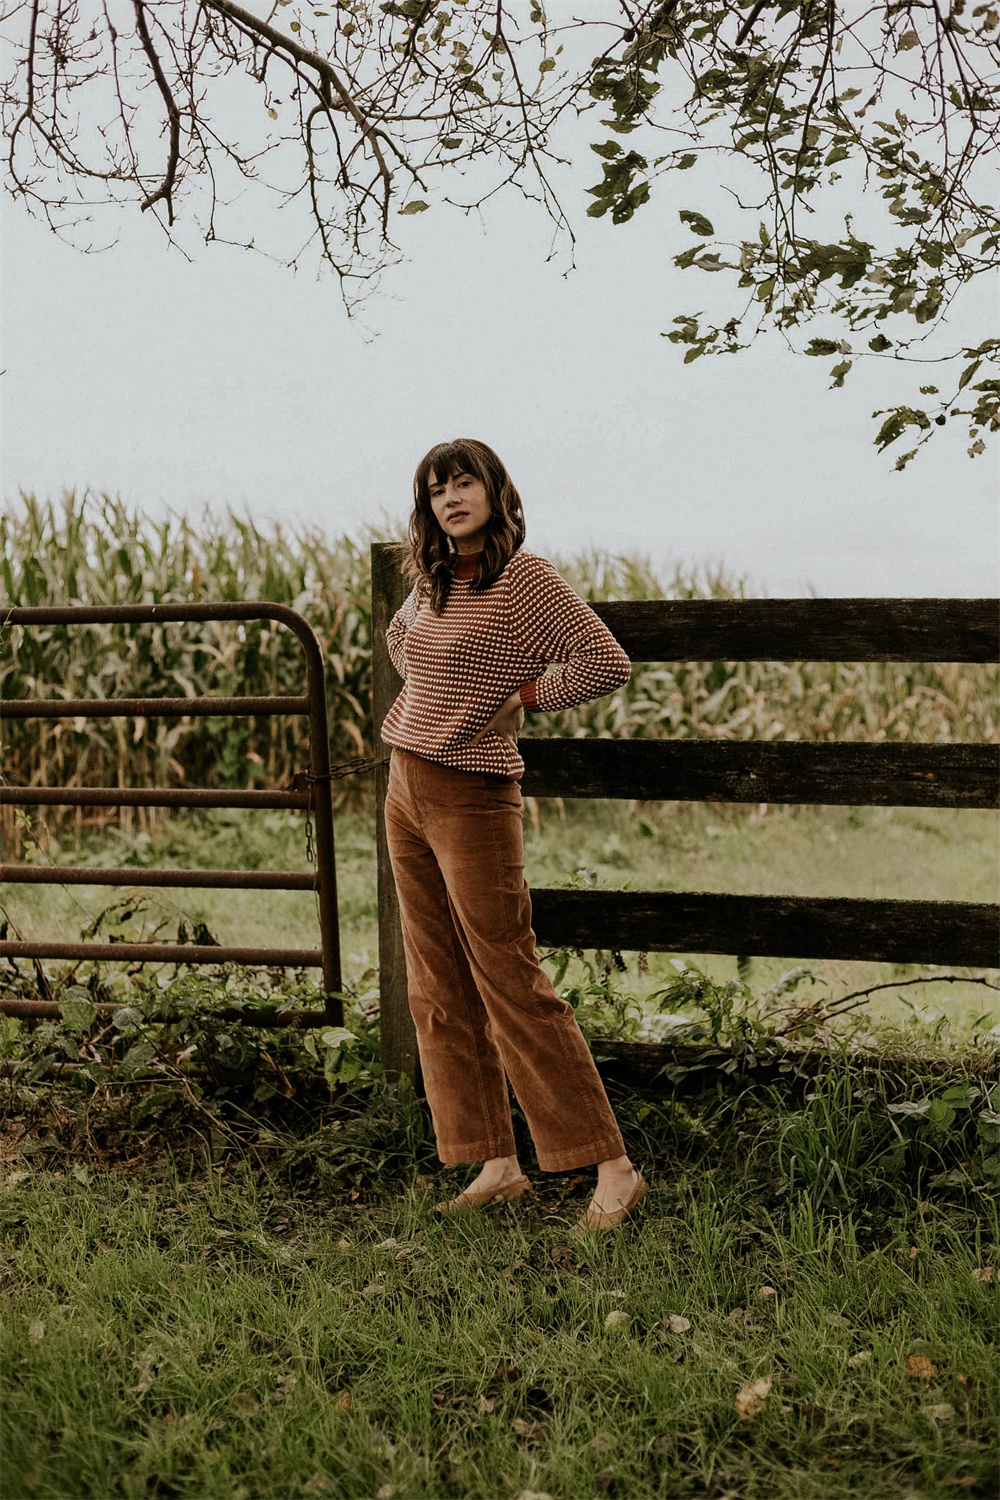 stylish corduroy pants and striped sweater outfit